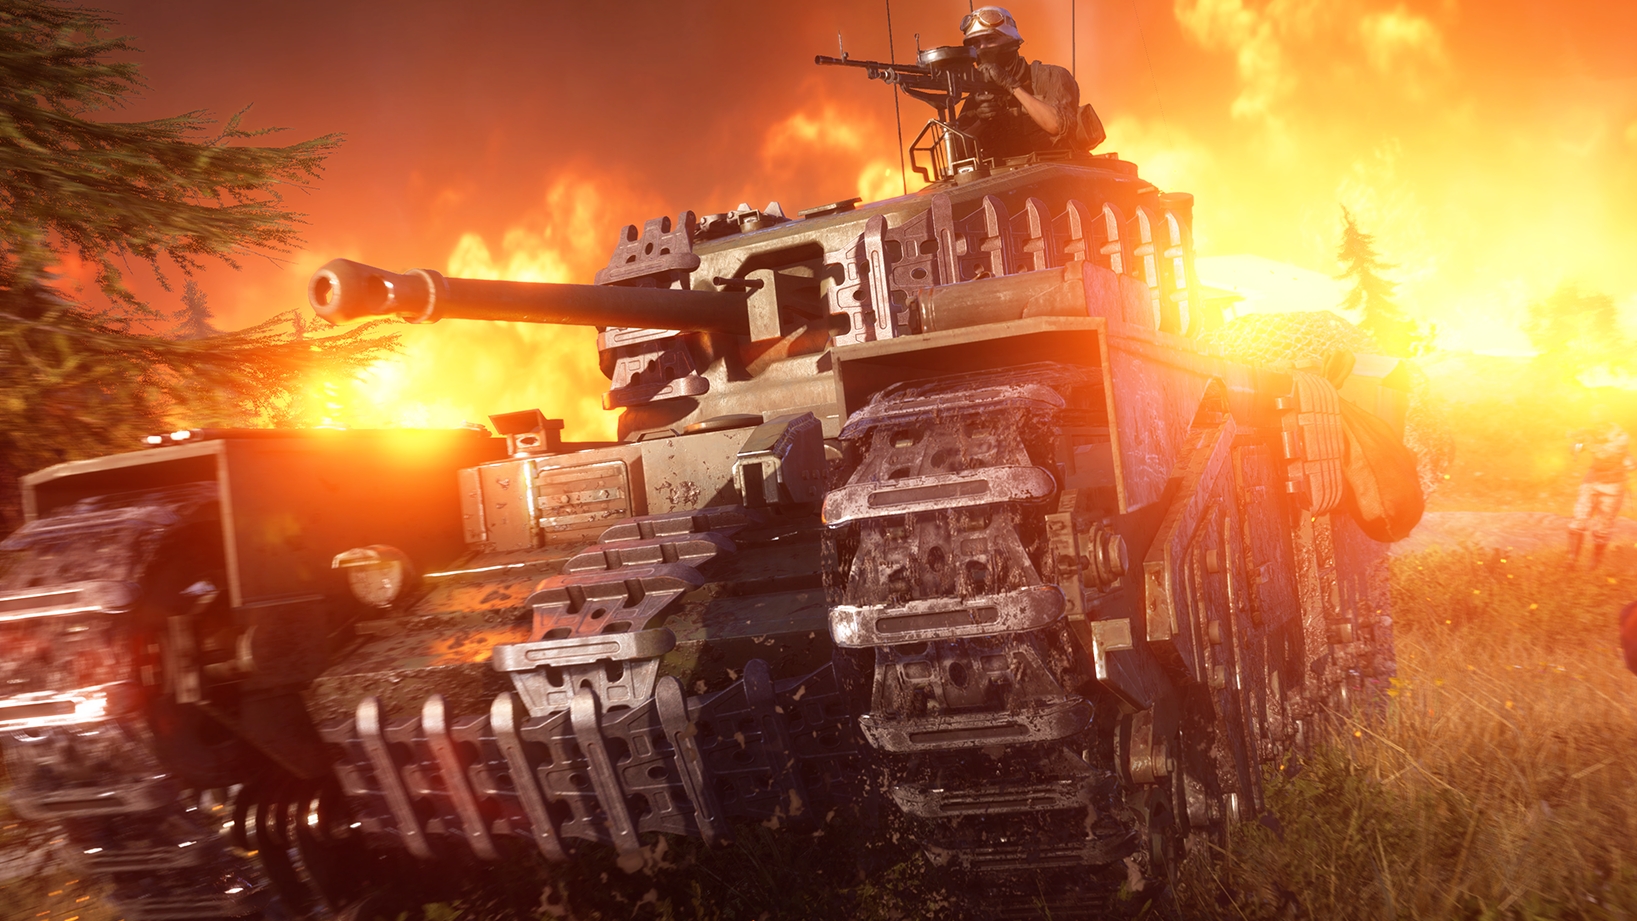 Battlefield 5's battle royale mode isn't being made by DICE